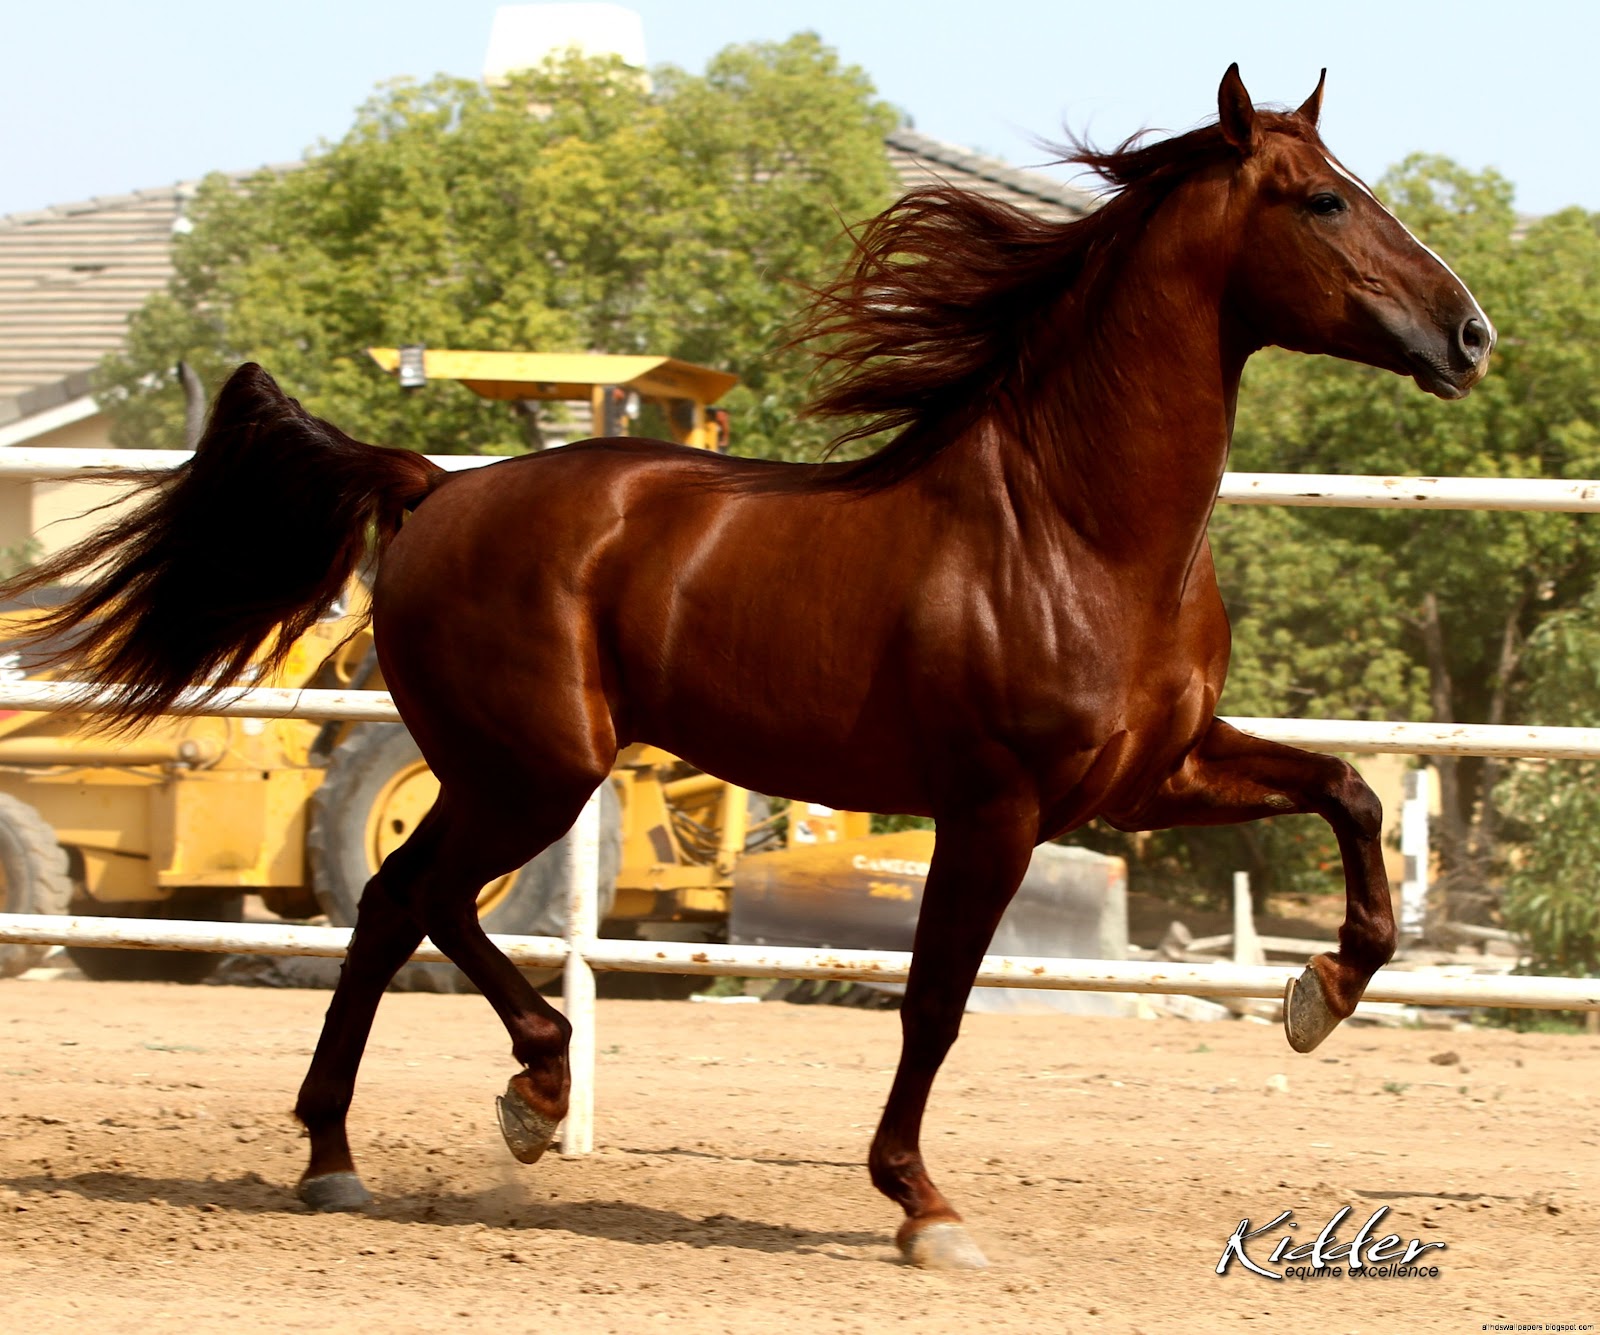 List 90+ Background Images Images Of Andalusian Horses Full HD, 2k, 4k